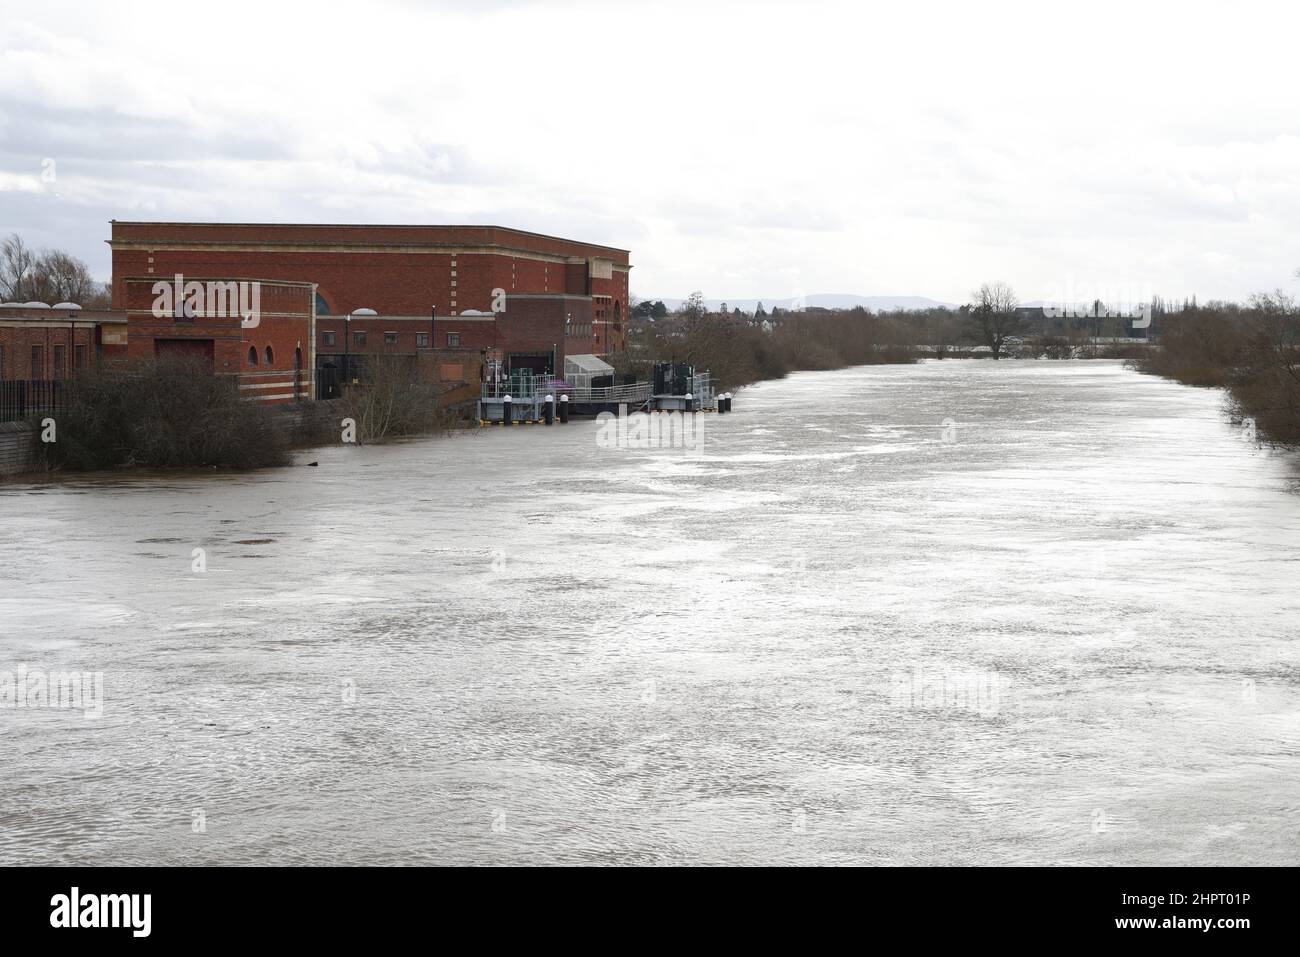 Tewkesbury, Gloucestershire, UK. 23 February 2022. River Severn one mile north of the ancient town of Tewkesbury on the verge of flooding near the Mythe Water Treatment Works. Credit: Thousand Word Media Ltd/Alamy Live News Stock Photo